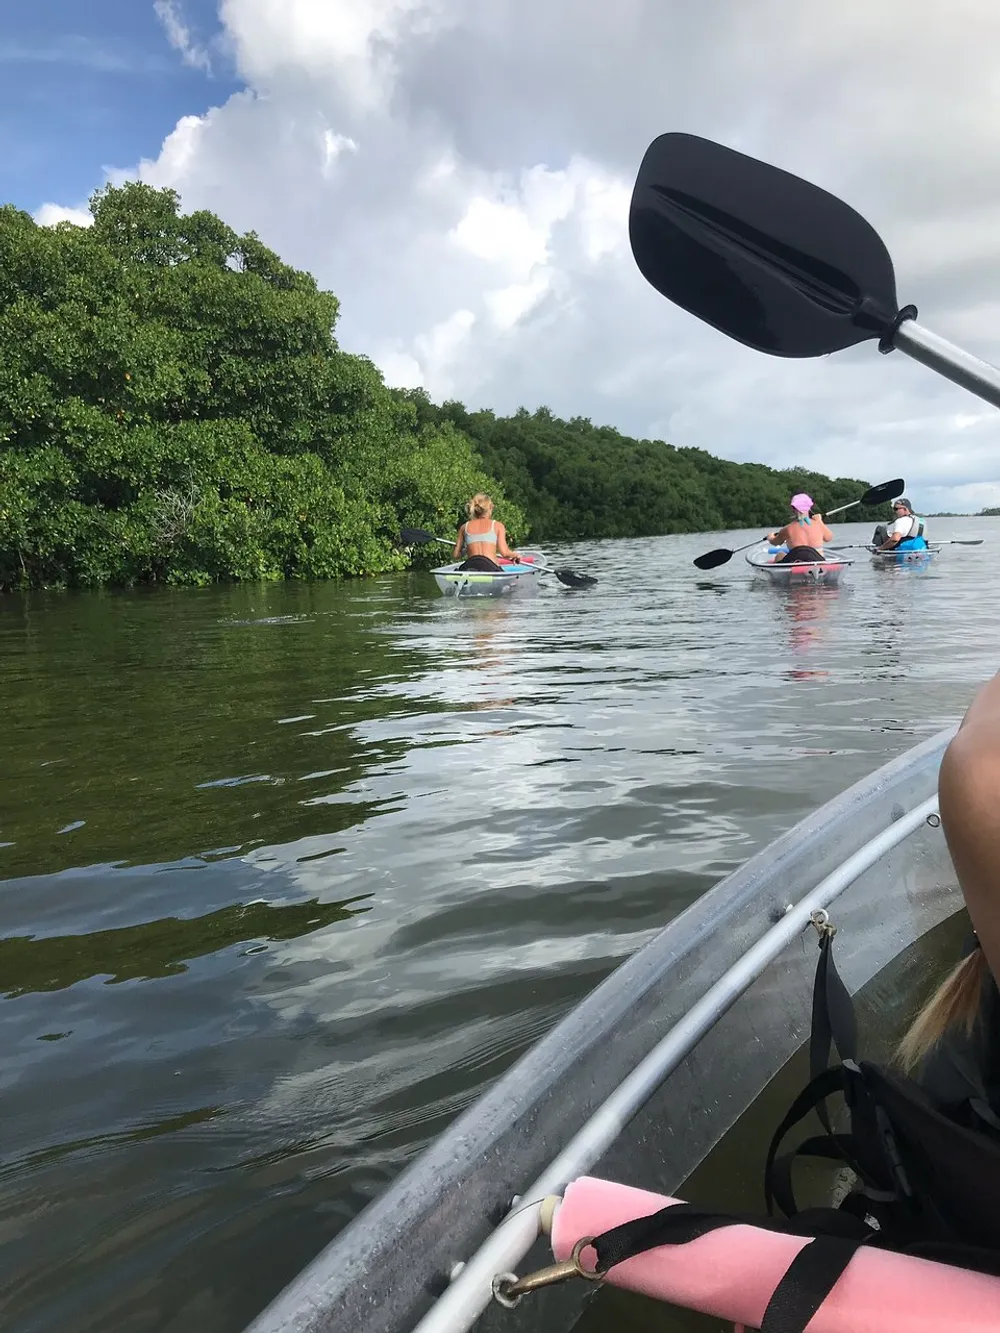 A group of people are kayaking on a calm river flanked by lush greenery under a cloudy sky